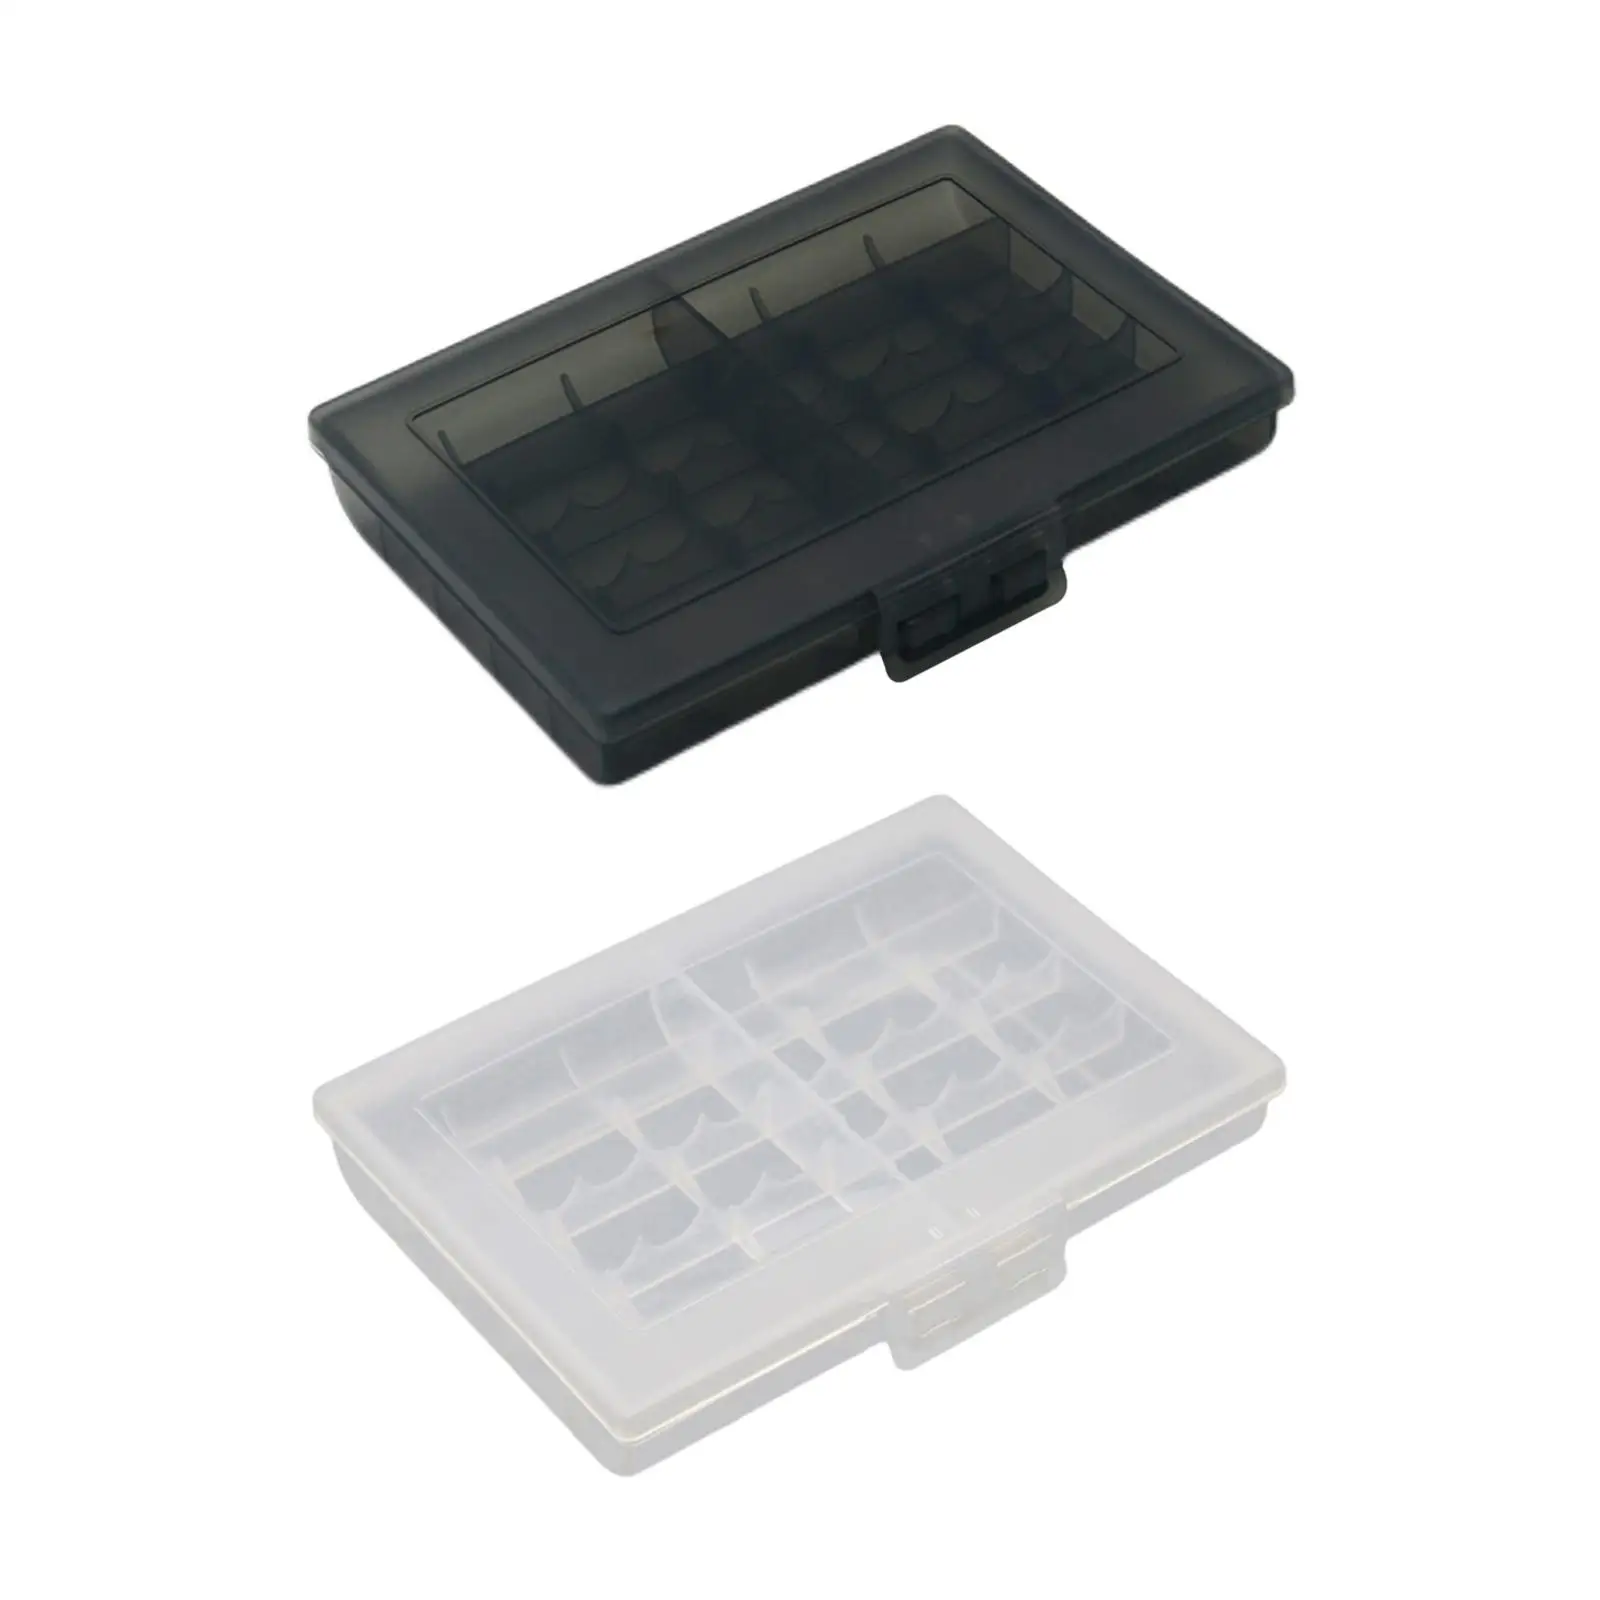 Battery Storage Case Holds 10 AA/AAA Batteries Portable Durable Anti Collision Practical Holder Box Protective Container